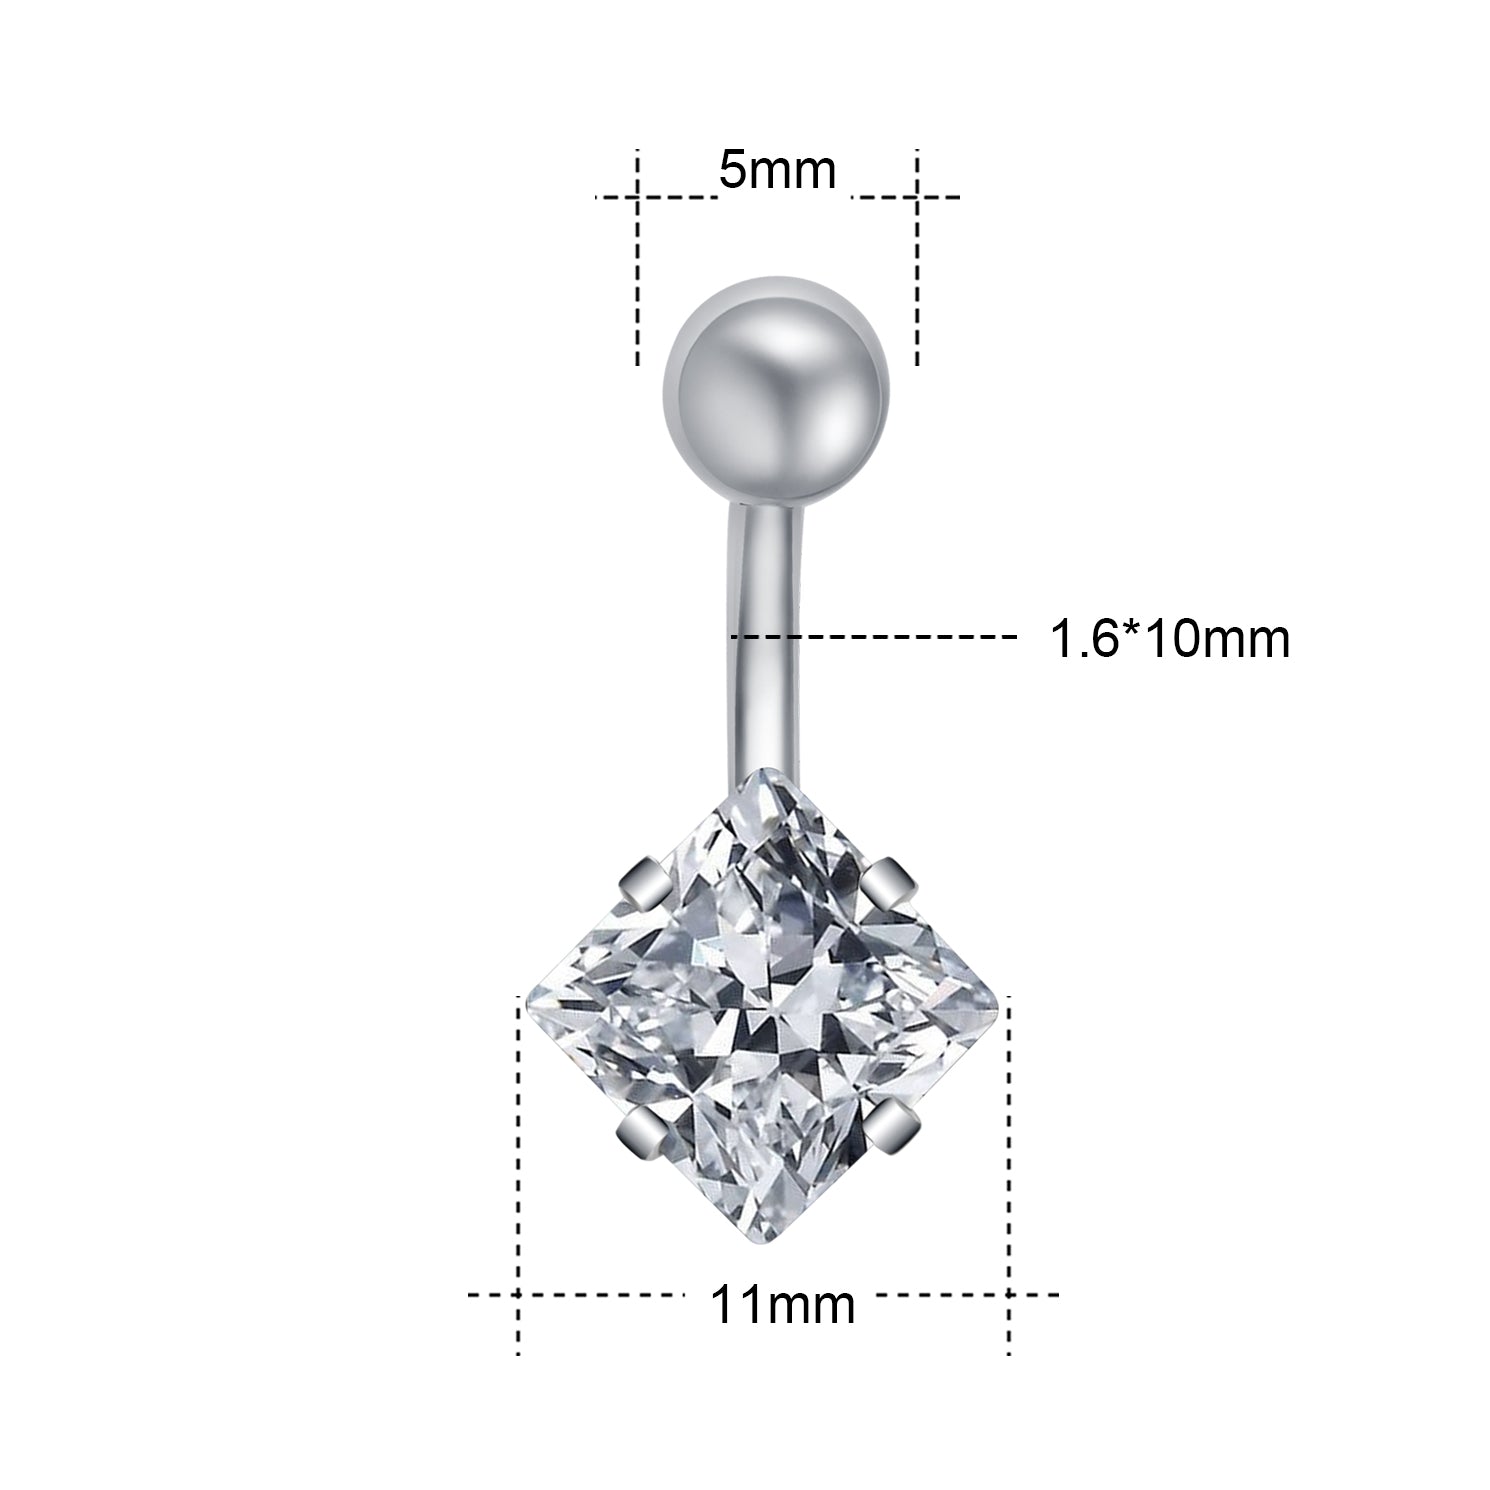 14g-Square-Big-Crystal-Belly-Button-Rings-Stainless-Steel-Belly-Piercing-Jewelry